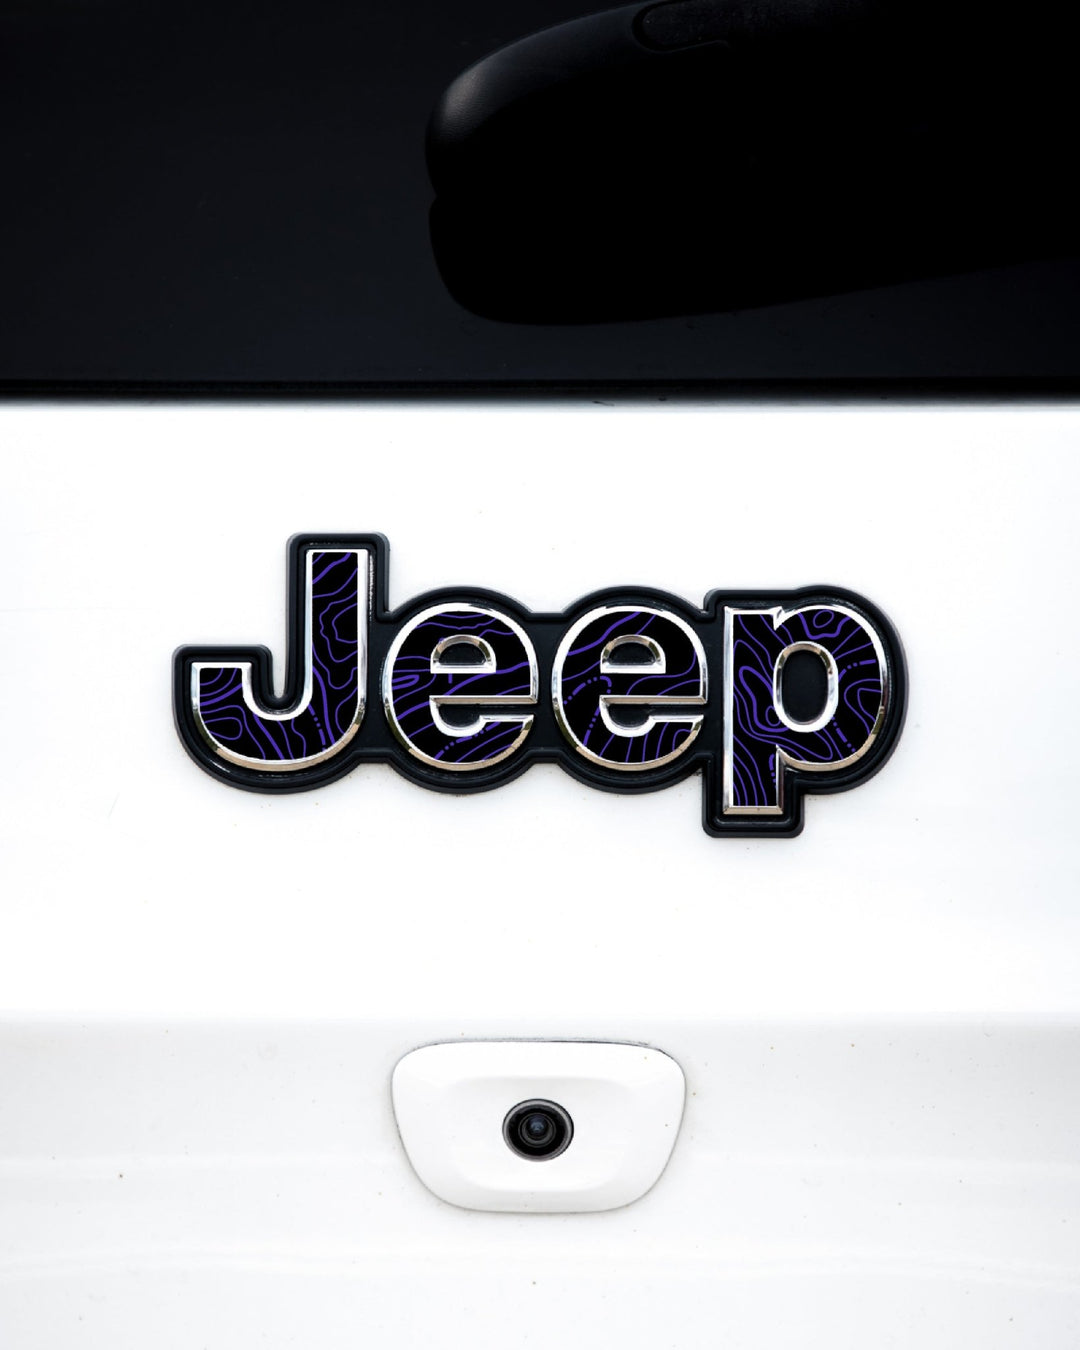 Topographical Map Emblem Overlay Accessory for Jeep Vehicles - AdventureLifeDecals